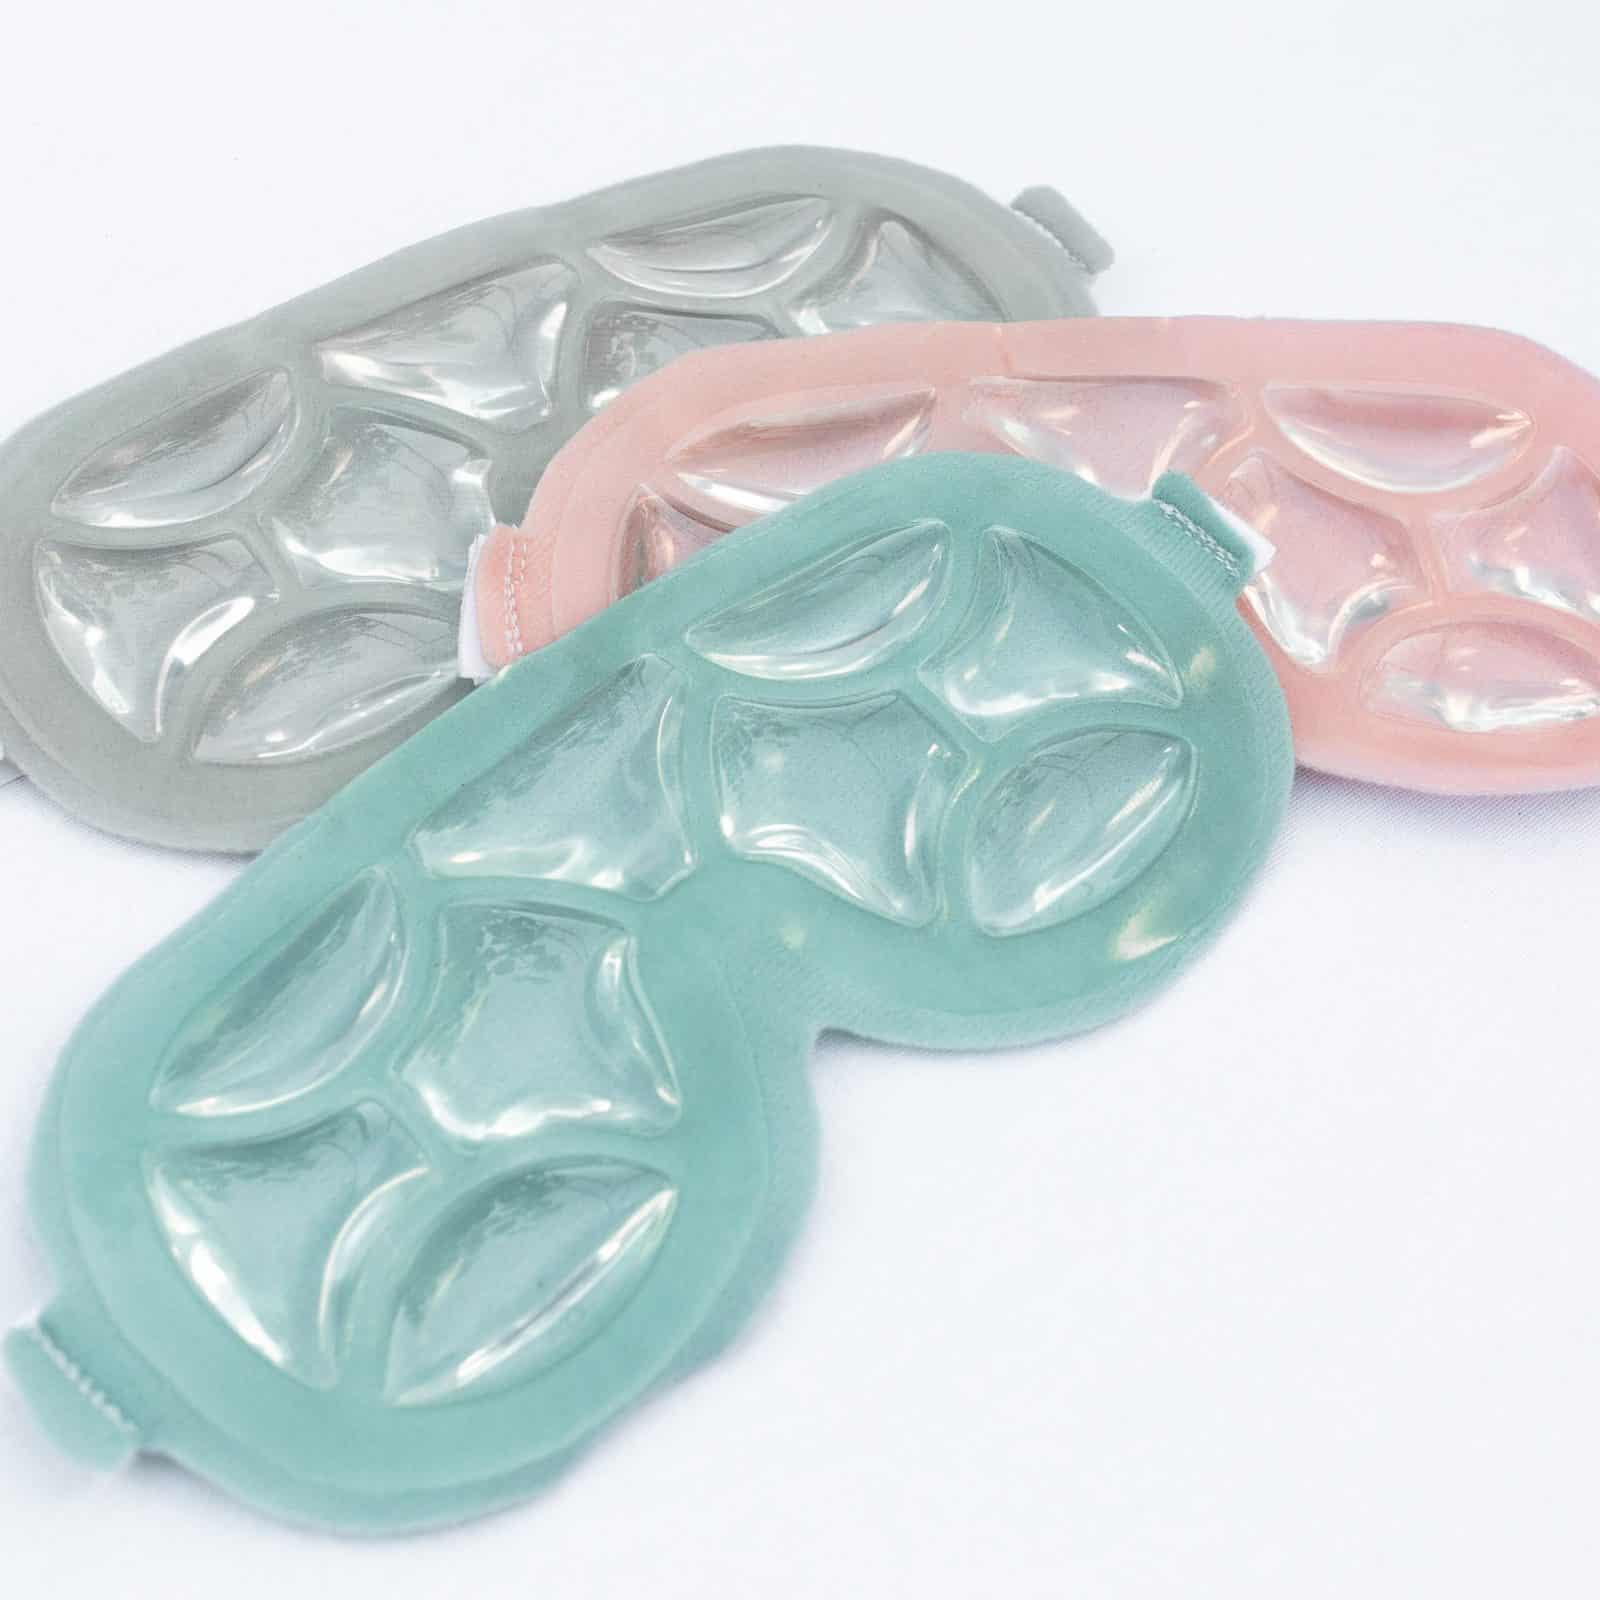 Featured image for “Eye Mask”